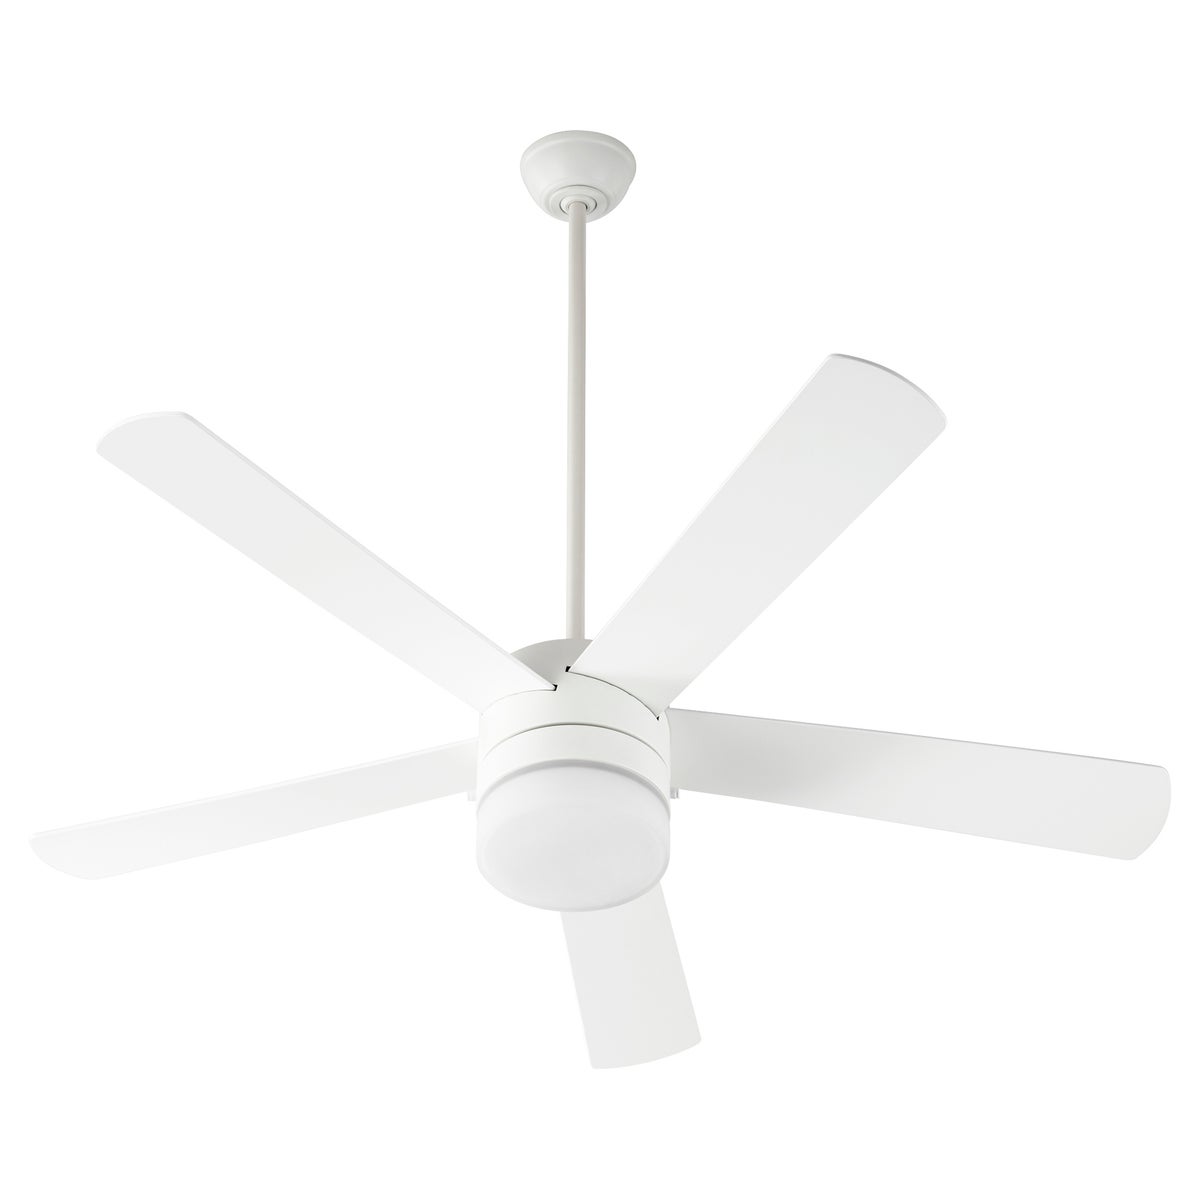 A mid century modern ceiling fan with a light, featuring a clean monochrome finish on the housing, motor, and blades. Effortlessly circulates air with its five-blade system. Perfect for delivering cooling comfort to your home.